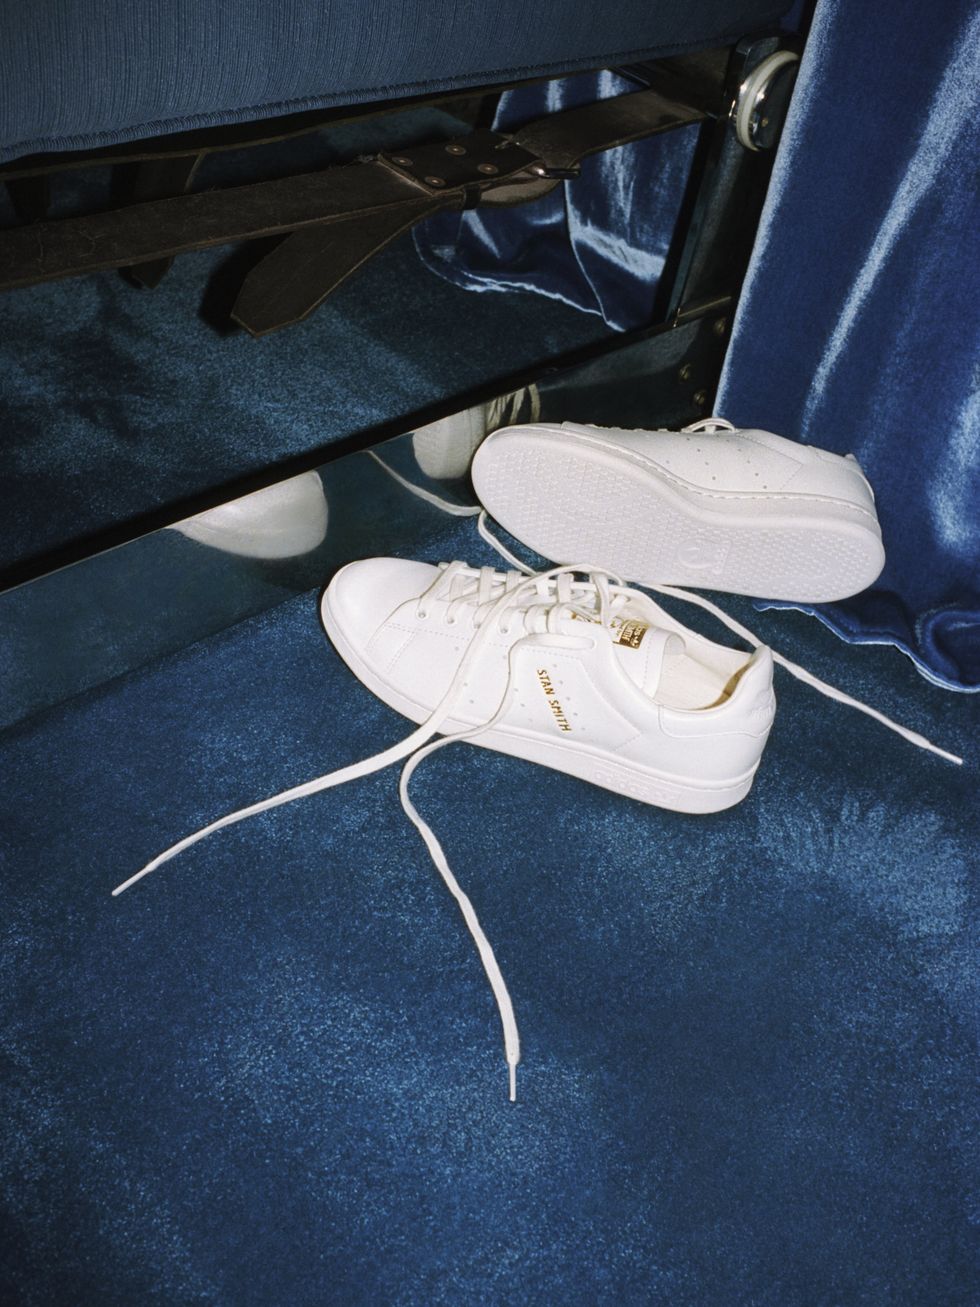 Who Is Stan Smith? A Shoe, and Much, Much More